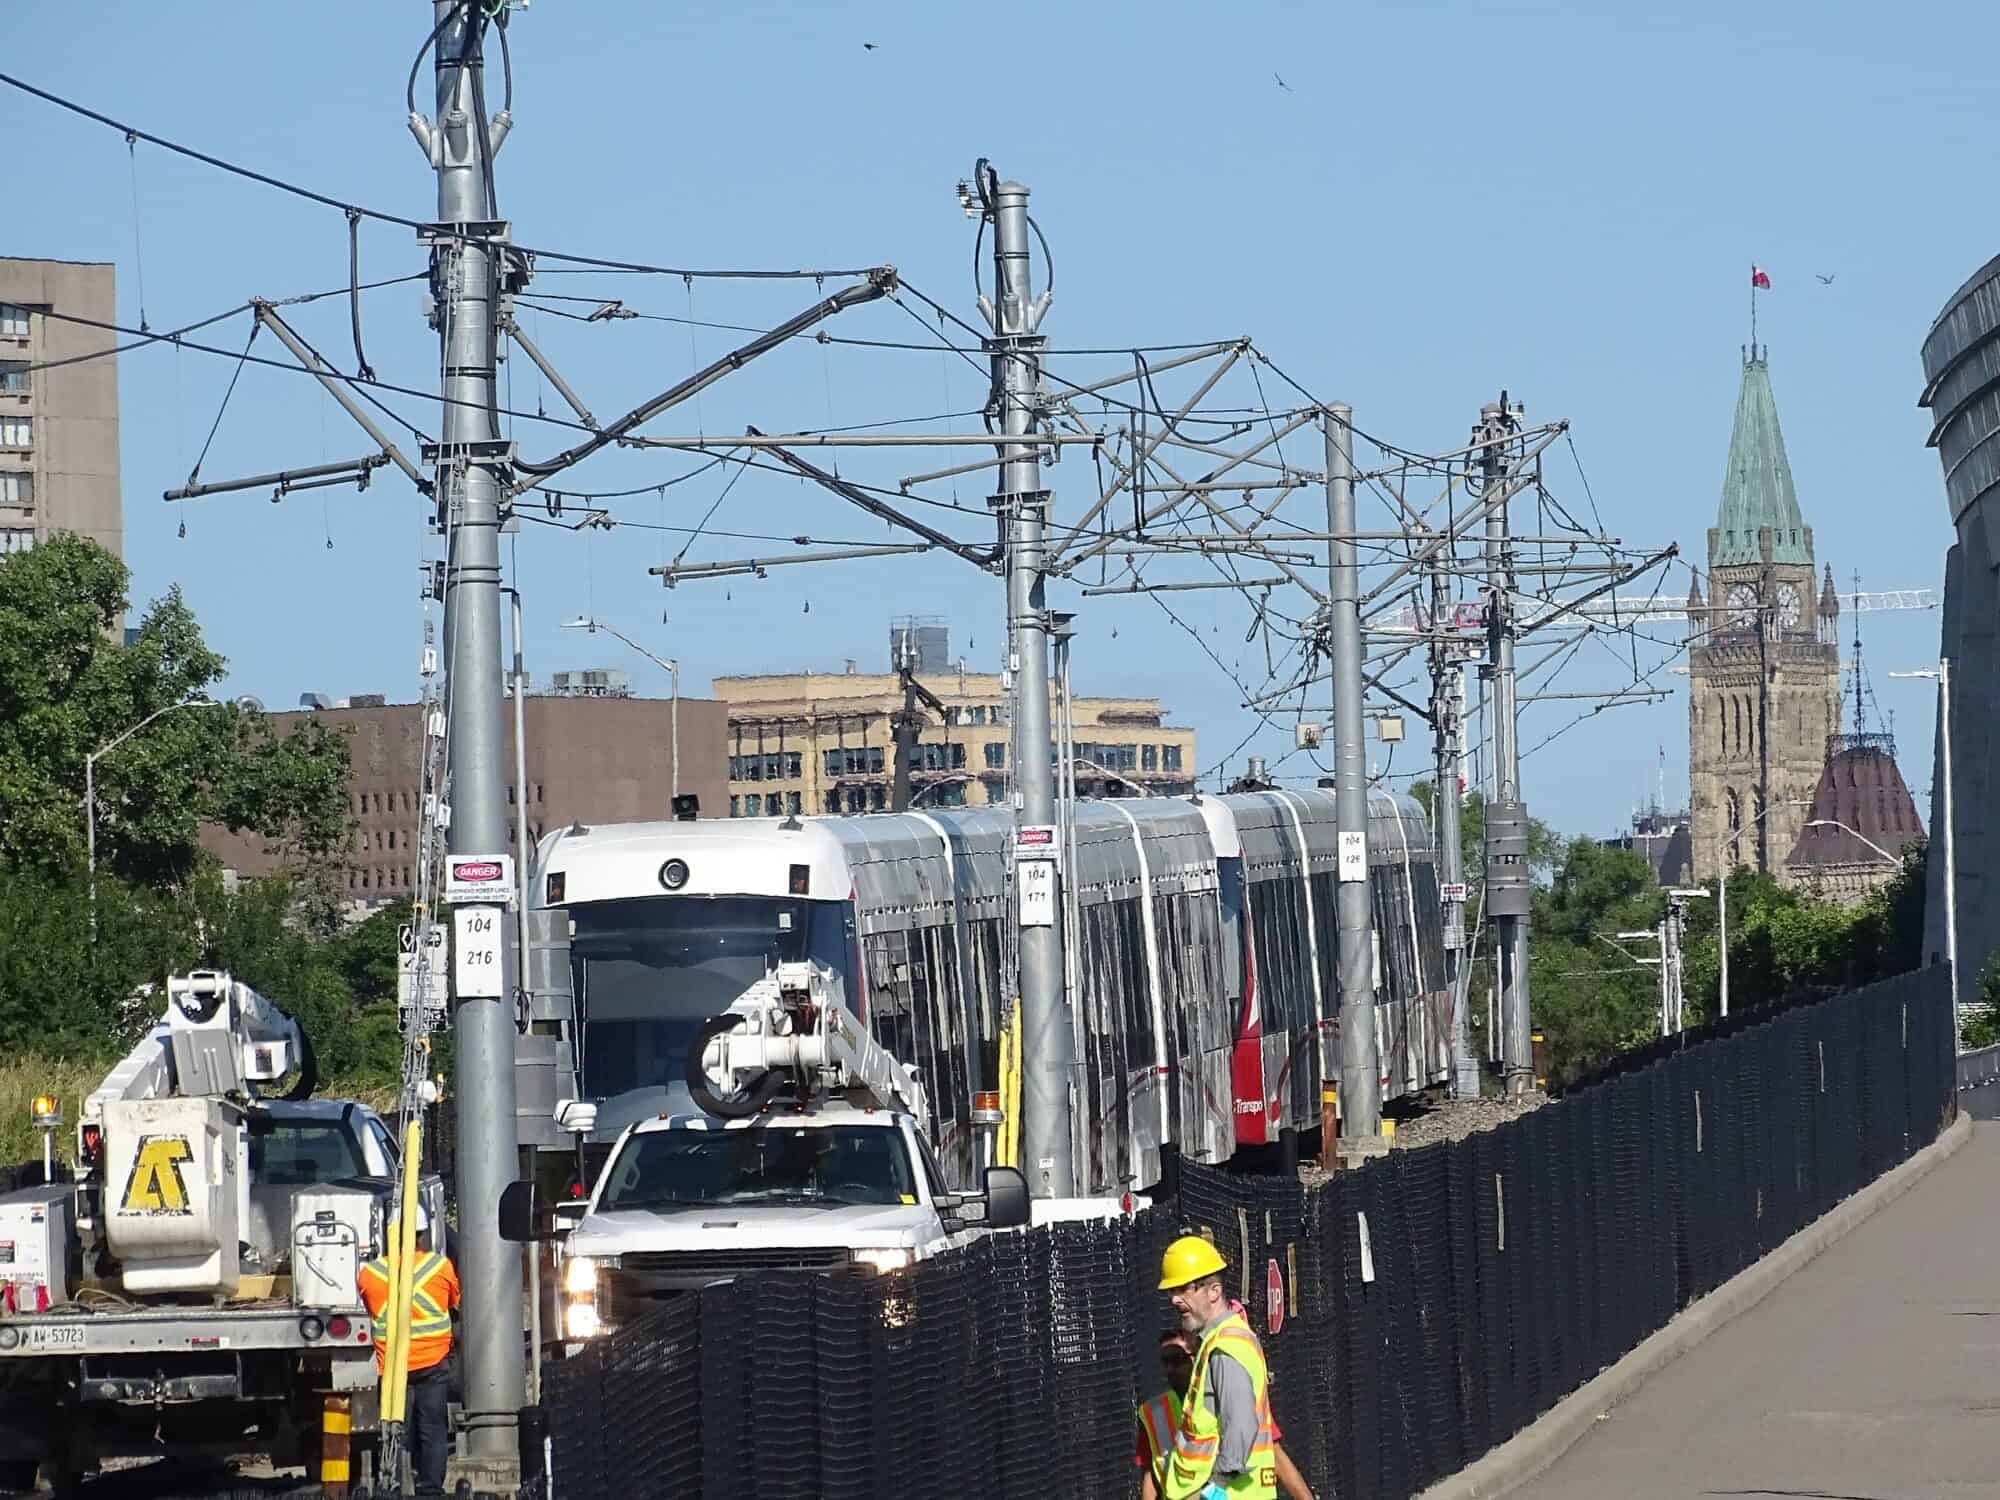 Repairs on the track to a Ottawa LRT vehicle with Parliament in the background. The unreliable and over-priced Ottawa LRT was built by a public-private partnership.